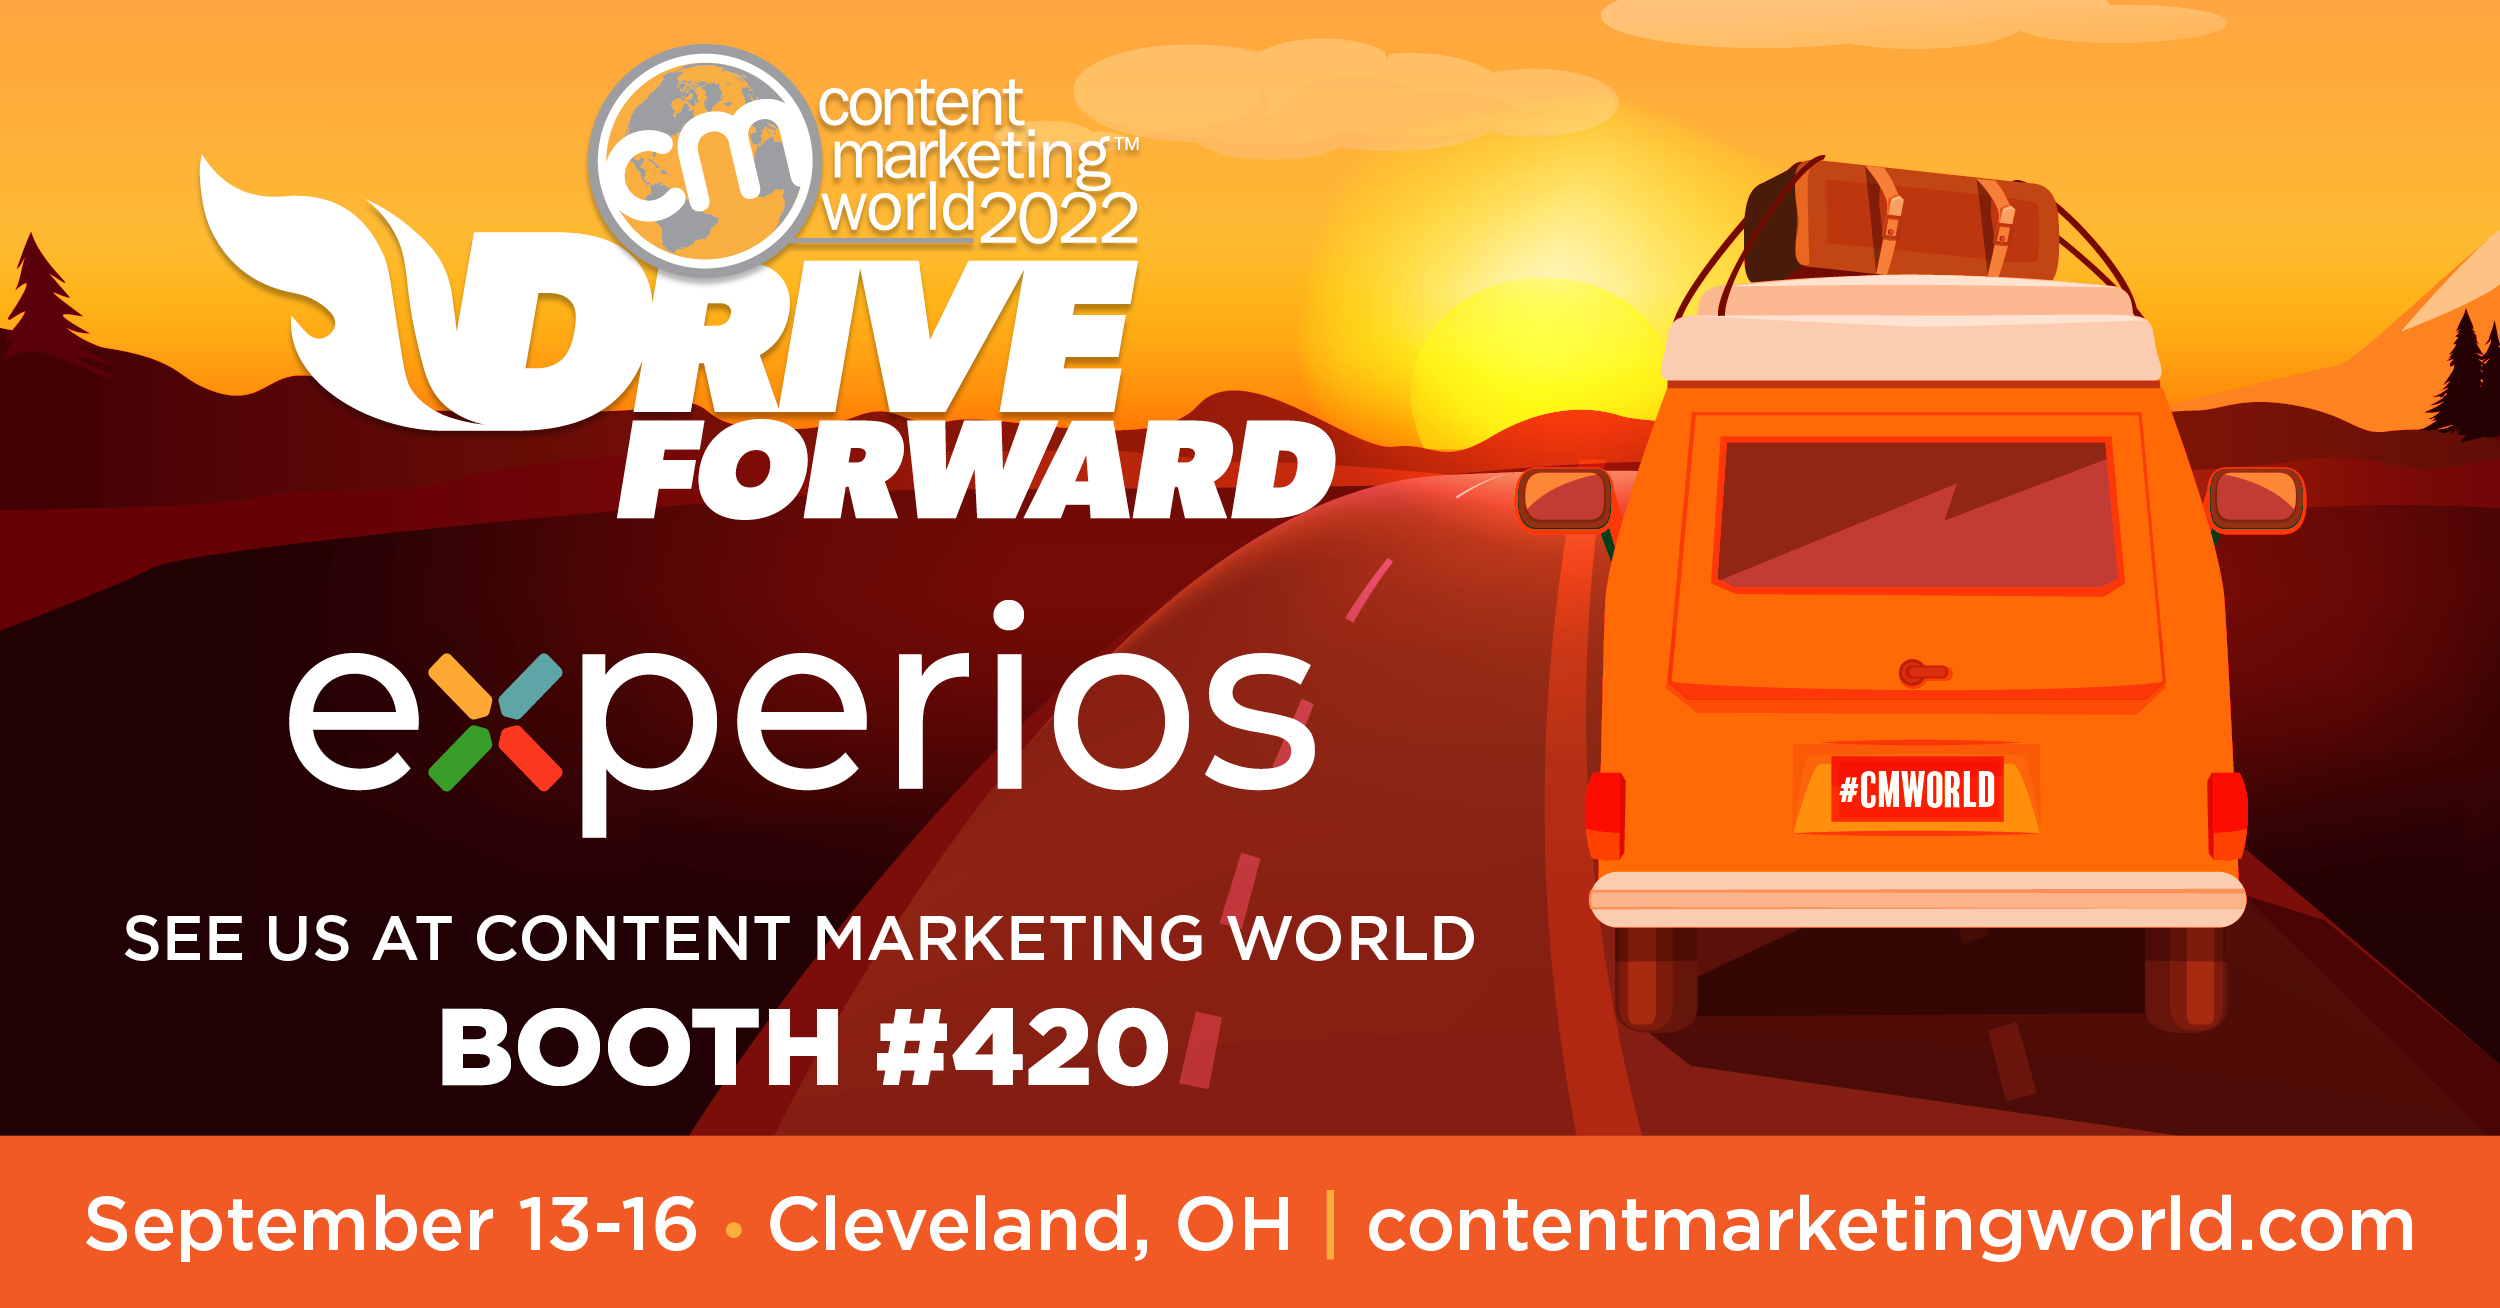 5 Key Takeaways from Content Marketing World